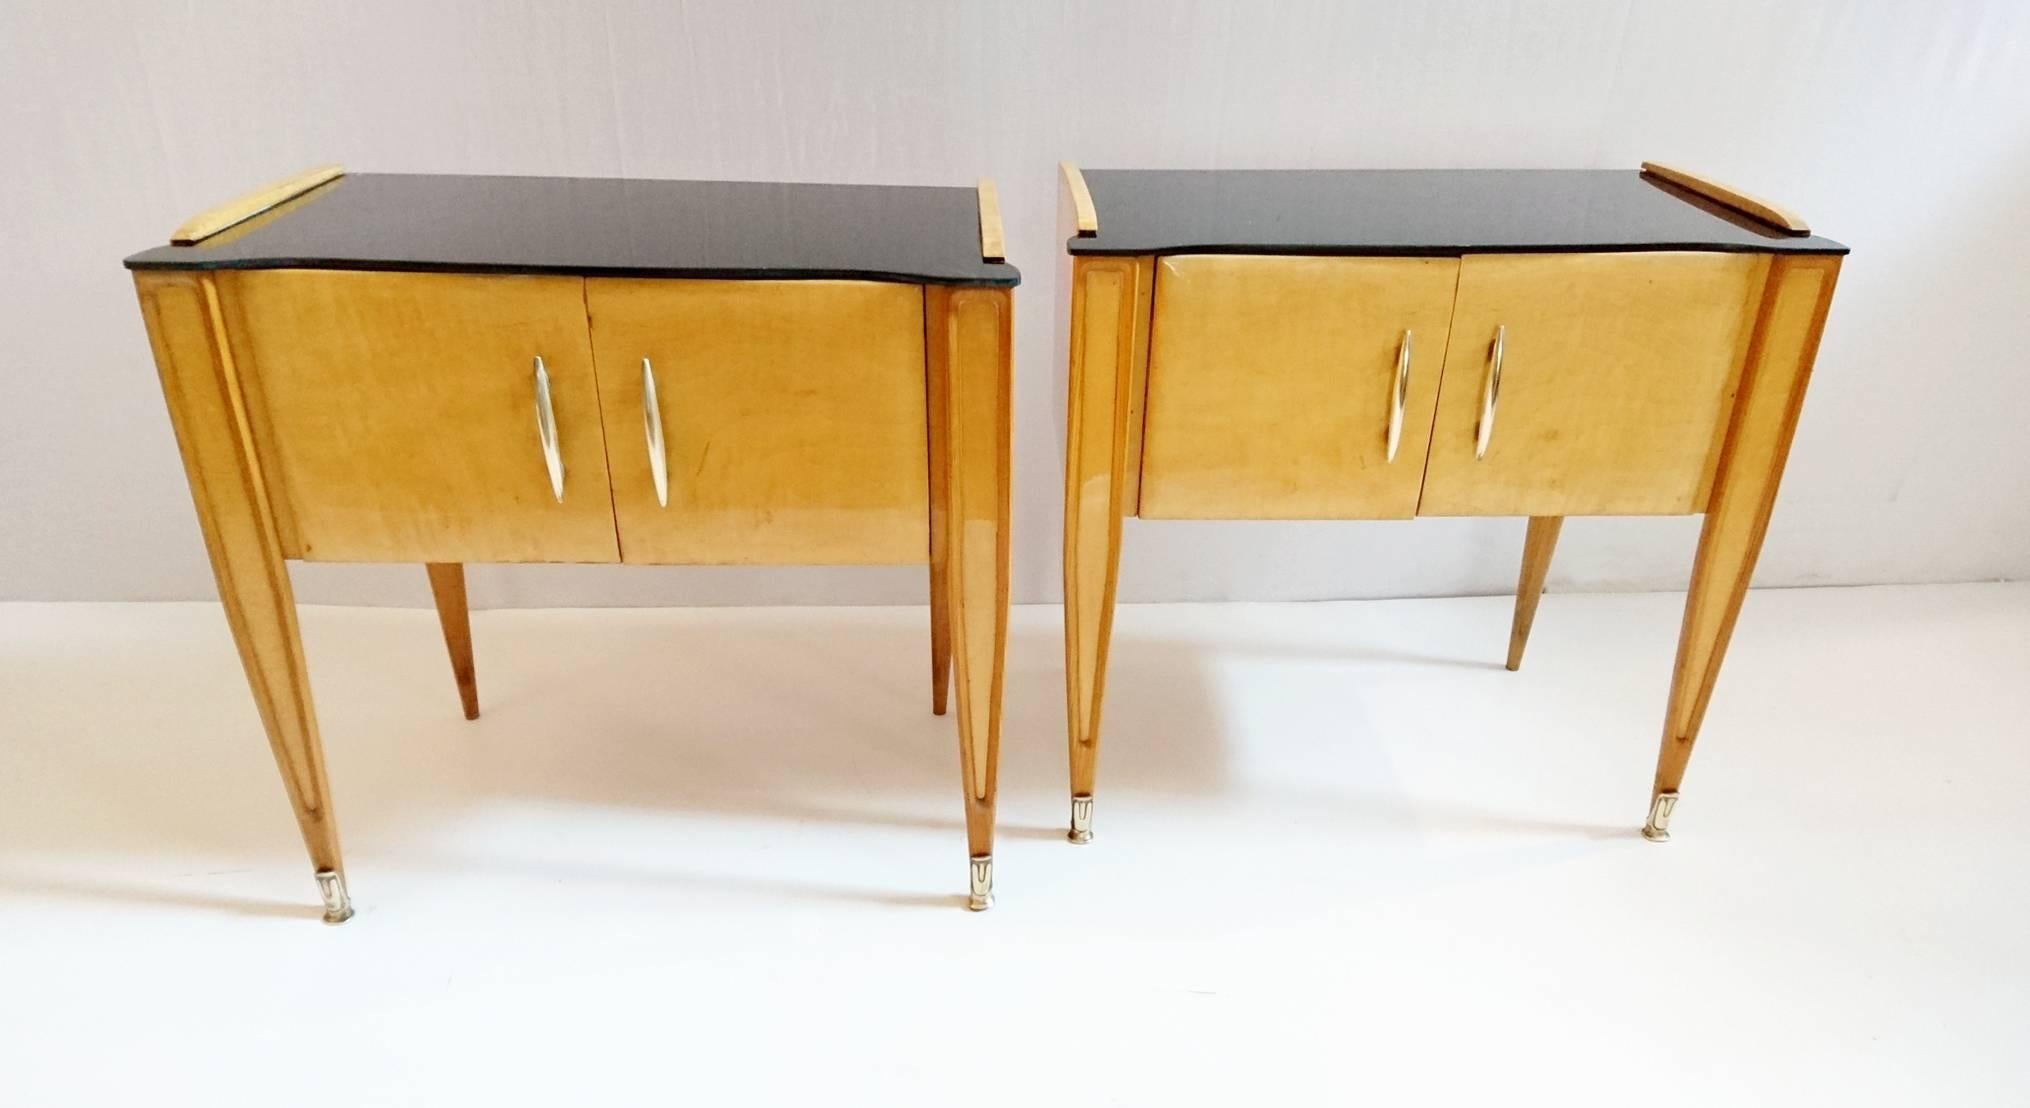 Nightstands with double doors with curved brass handles, standing on slim tapered legs with custom brass endings, each table glass is black on top surface. Before delivery both tables will be professionally restored.